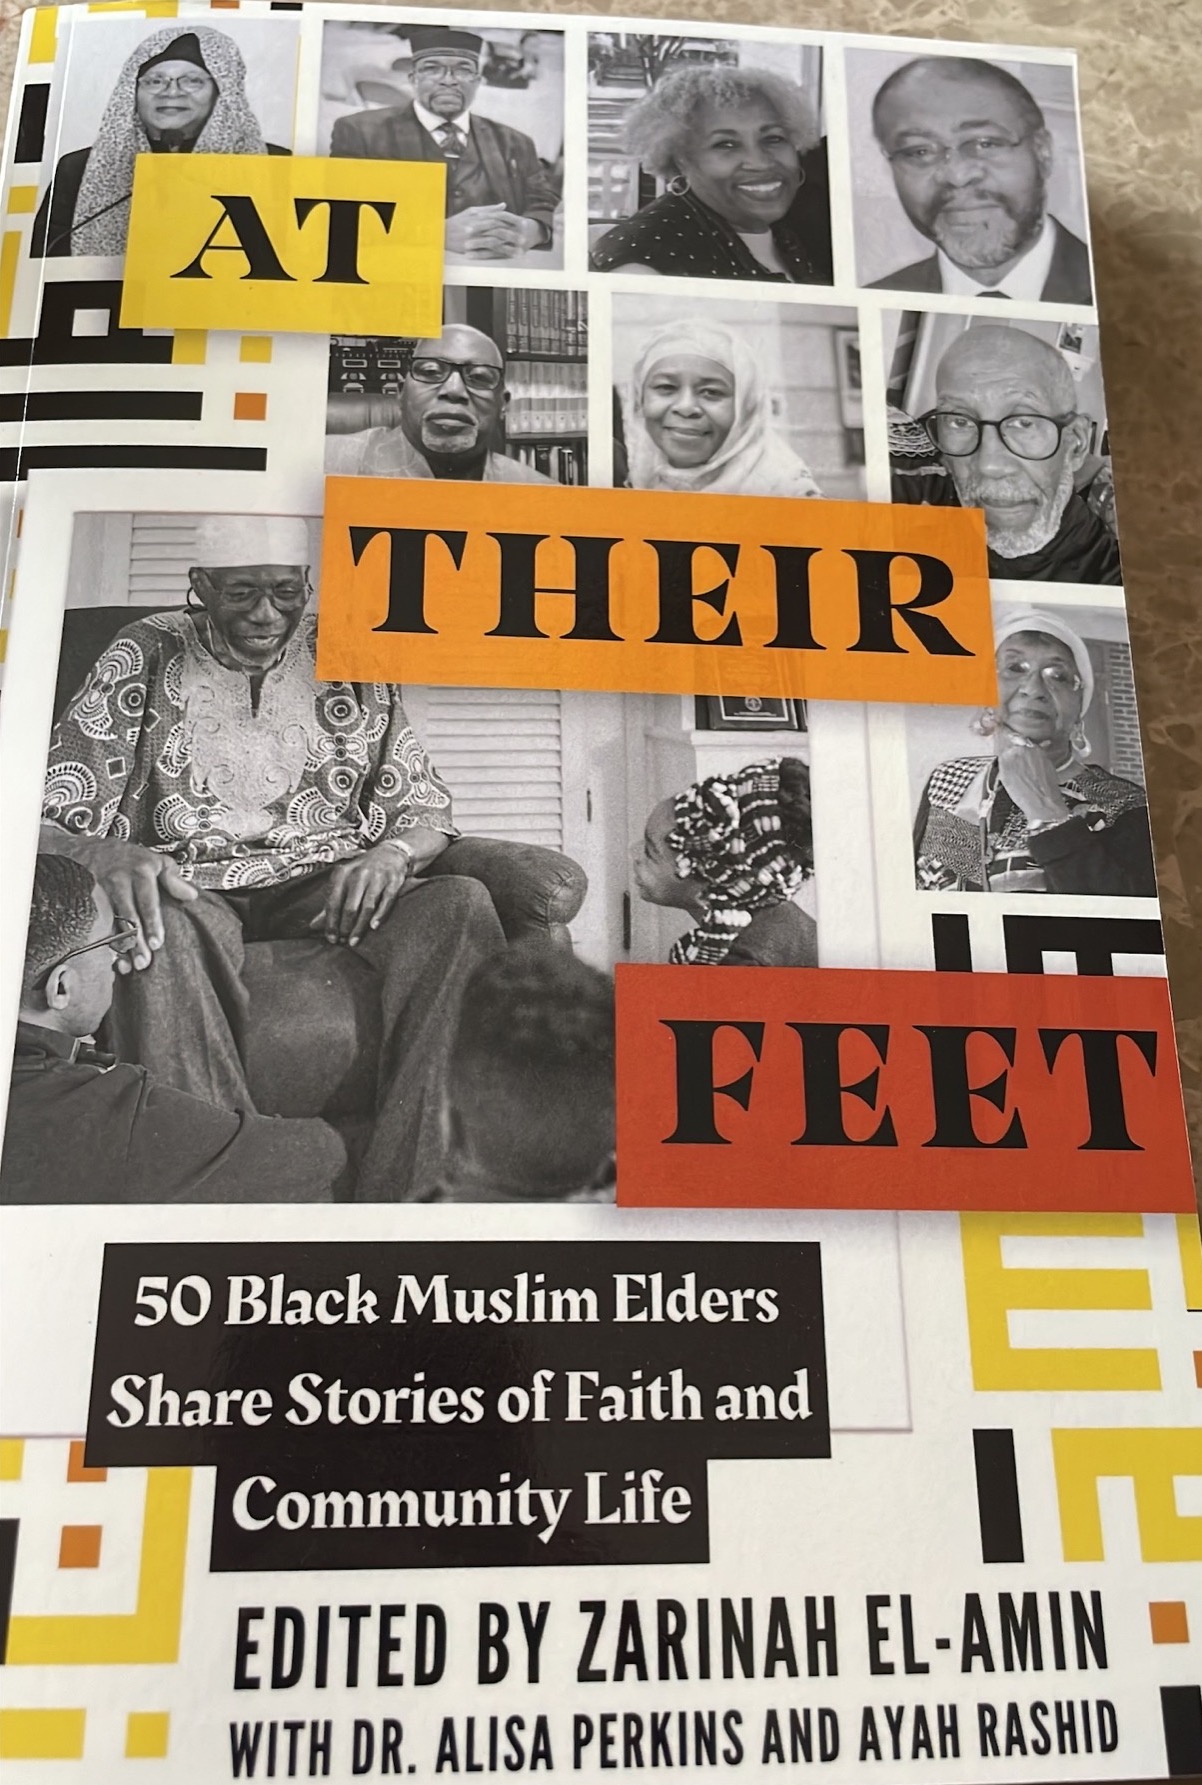 Cover of the book "At Their Feet."